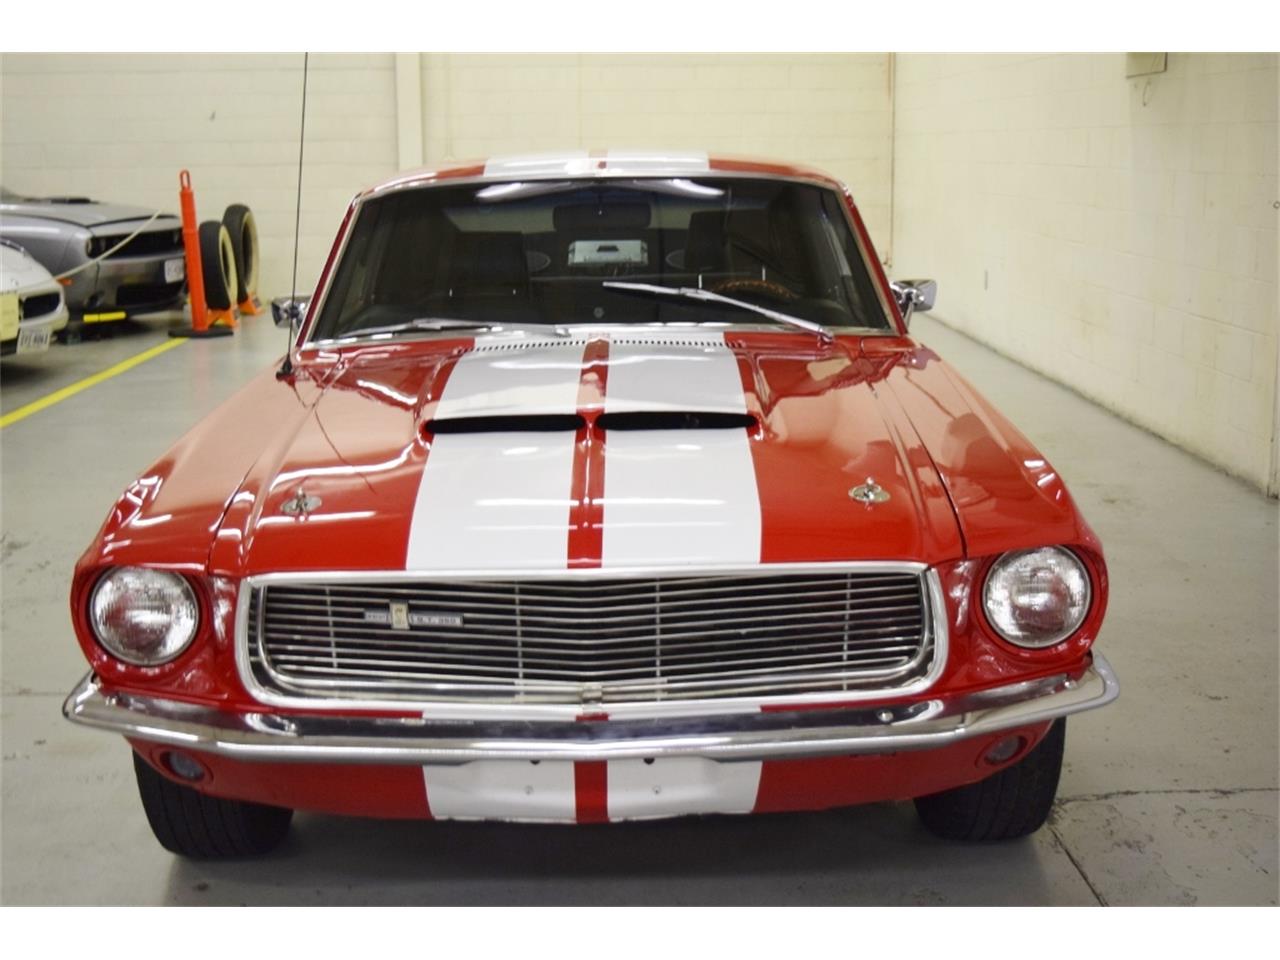 1967 Ford Mustang For Sale Classiccars Com Cc 1311006